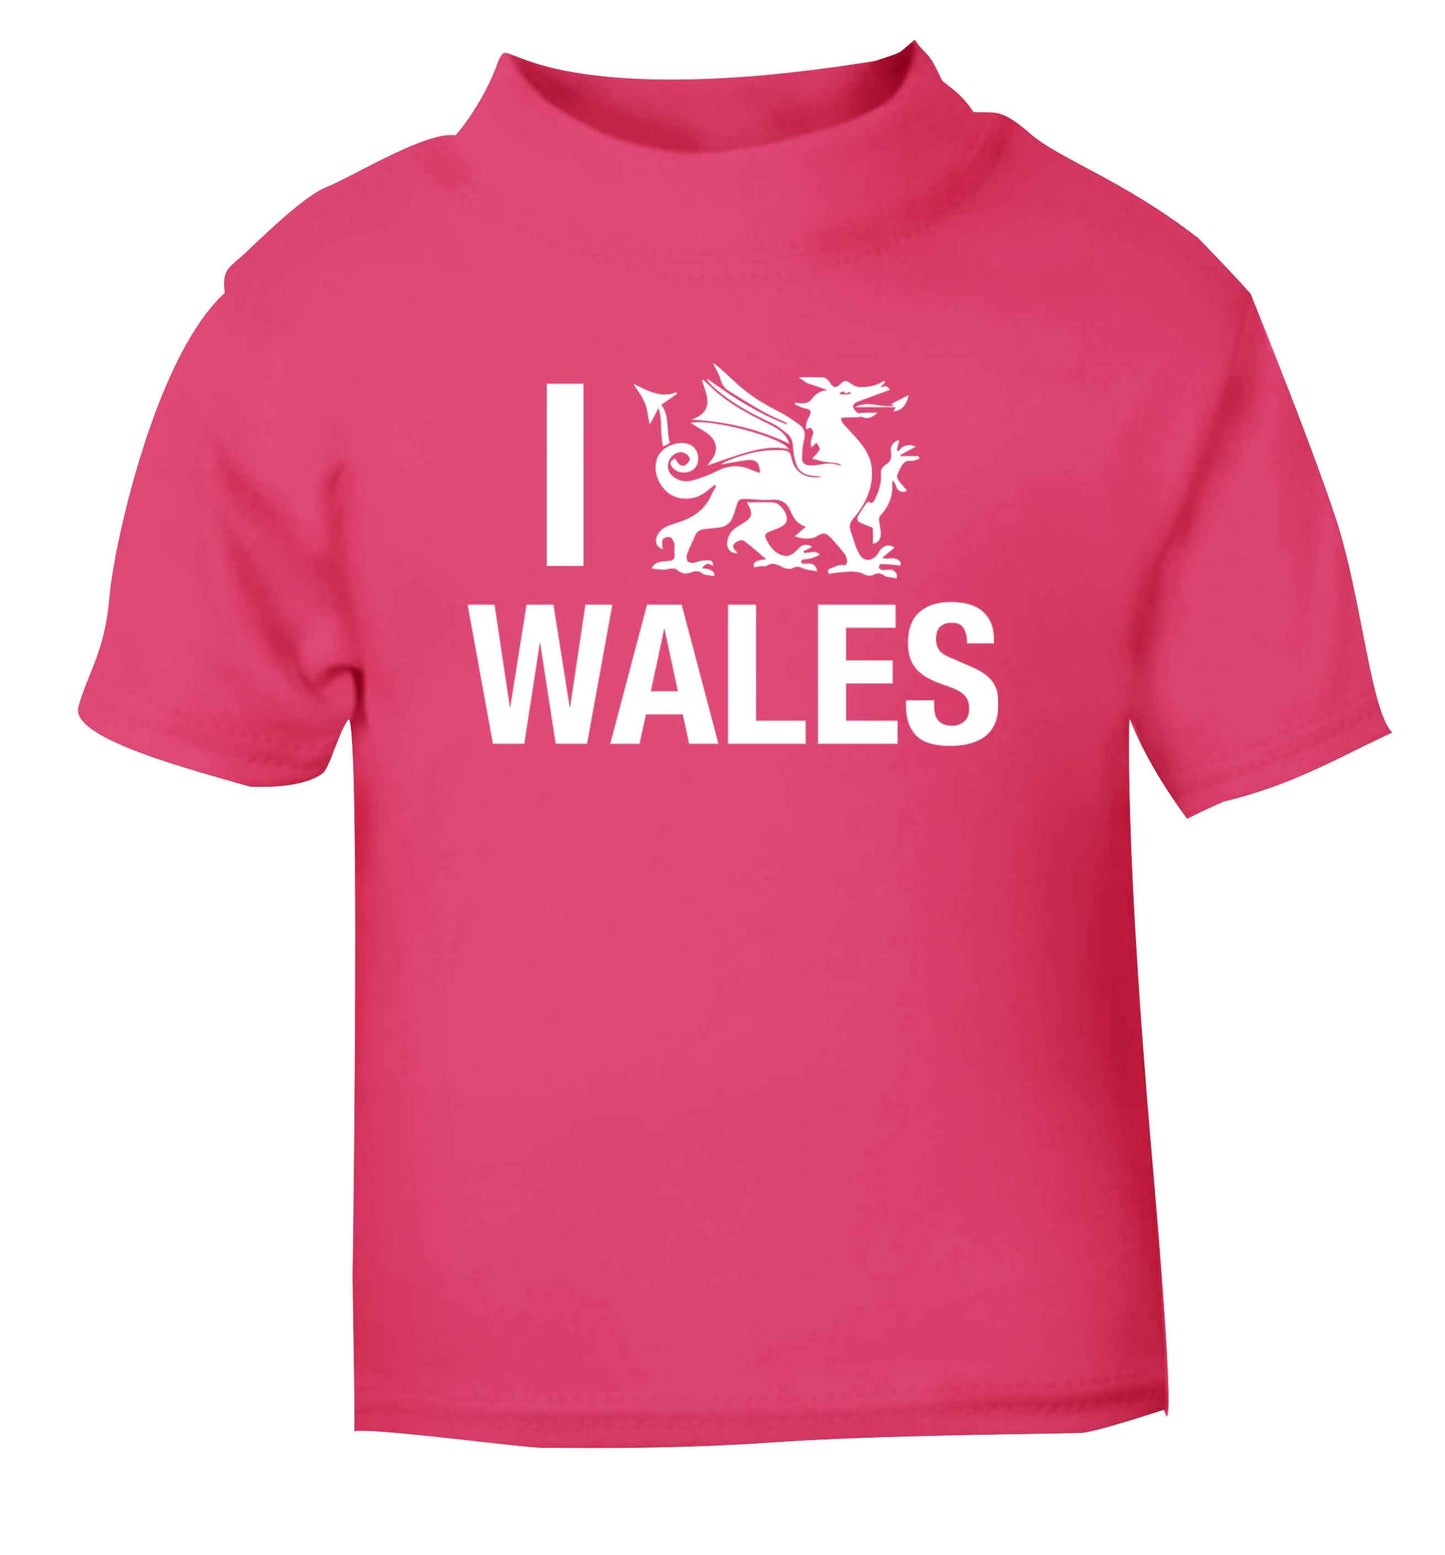 I love Wales pink Baby Toddler Tshirt 2 Years